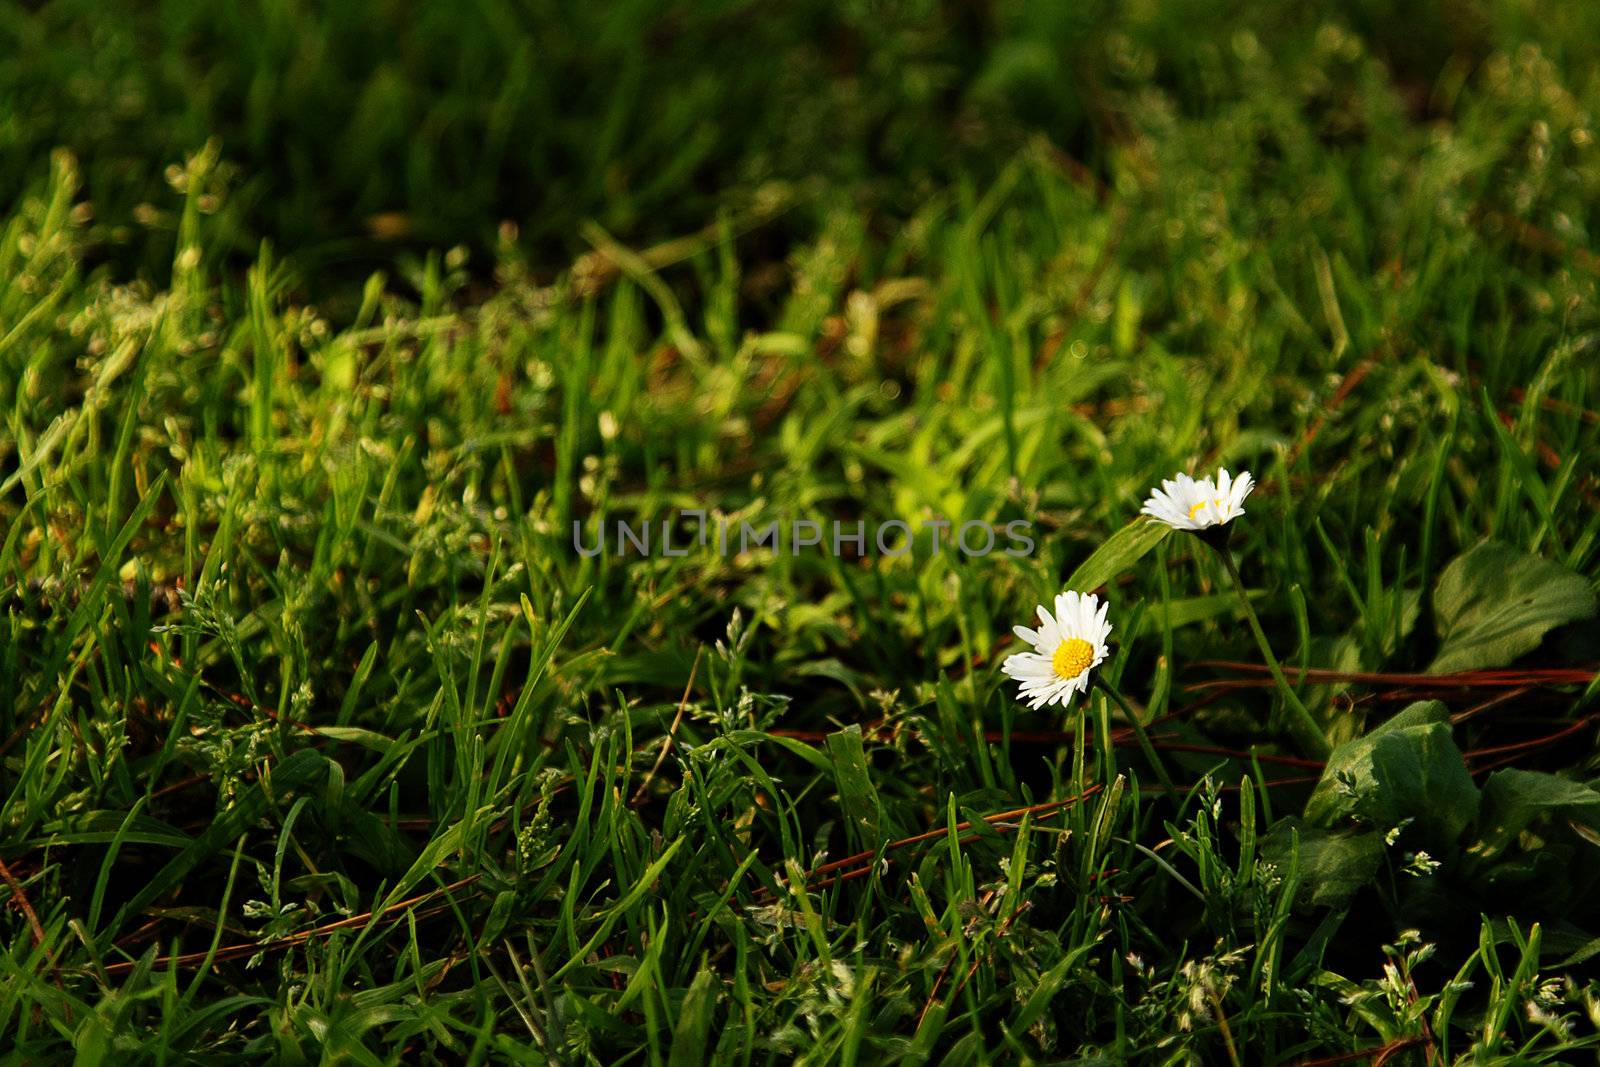 Two small white daisies among green grass